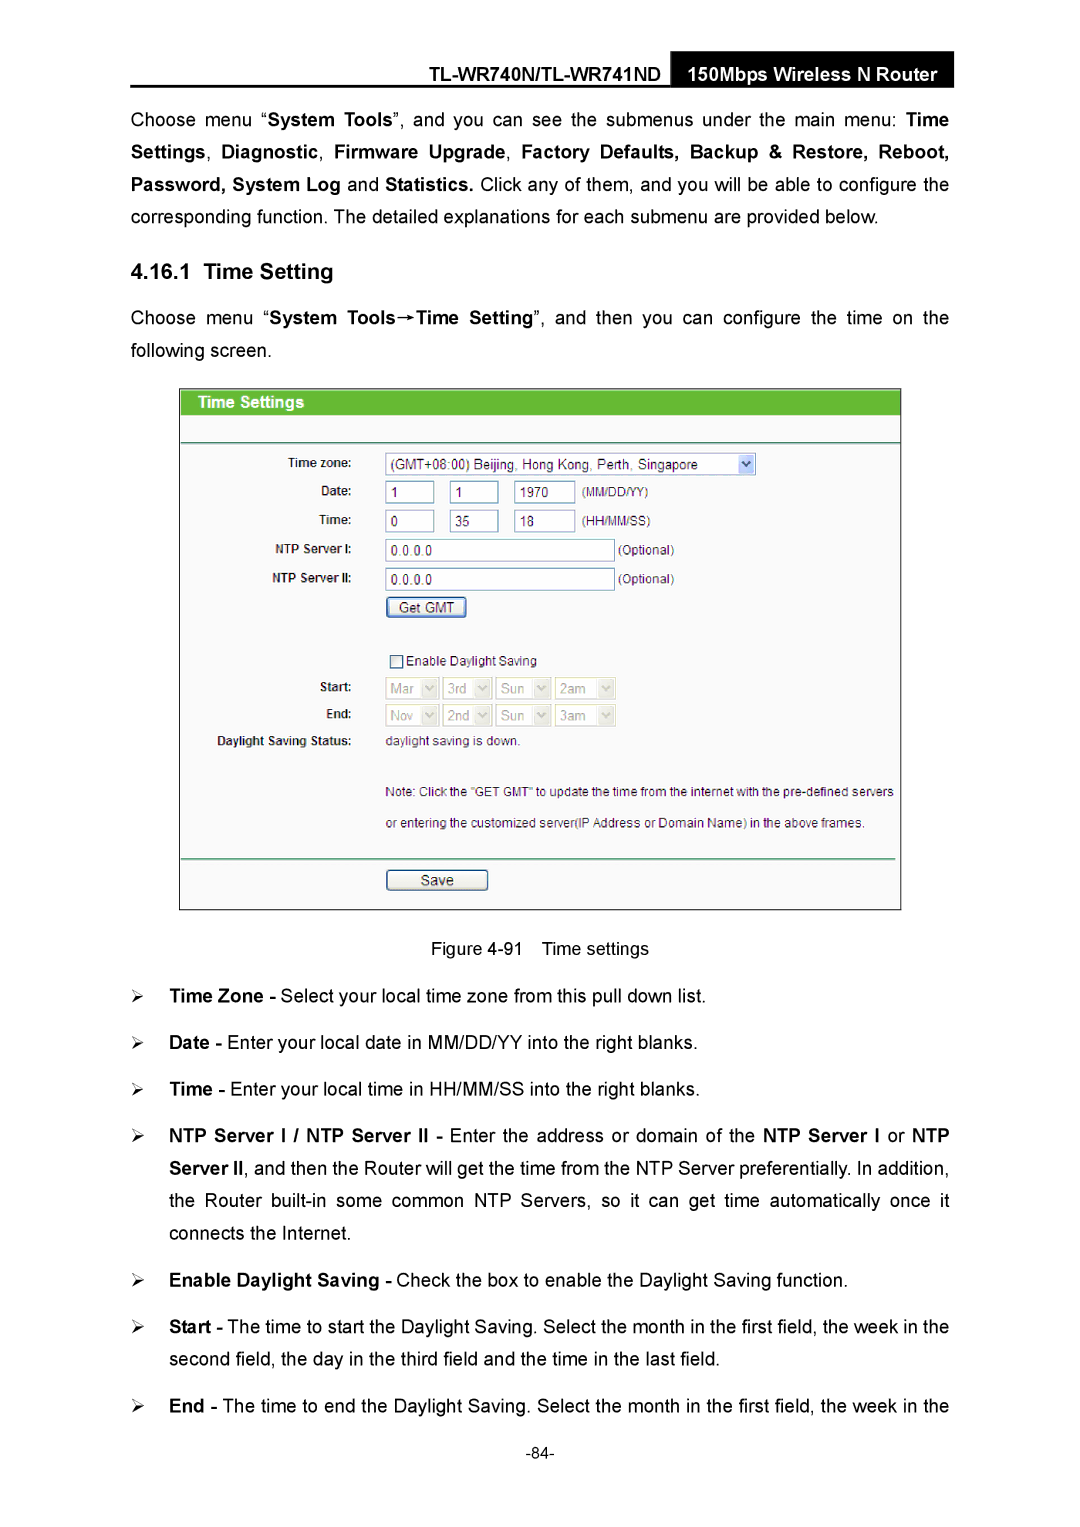 TP-Link TL-WR741ND manual Time Setting, Time settings 